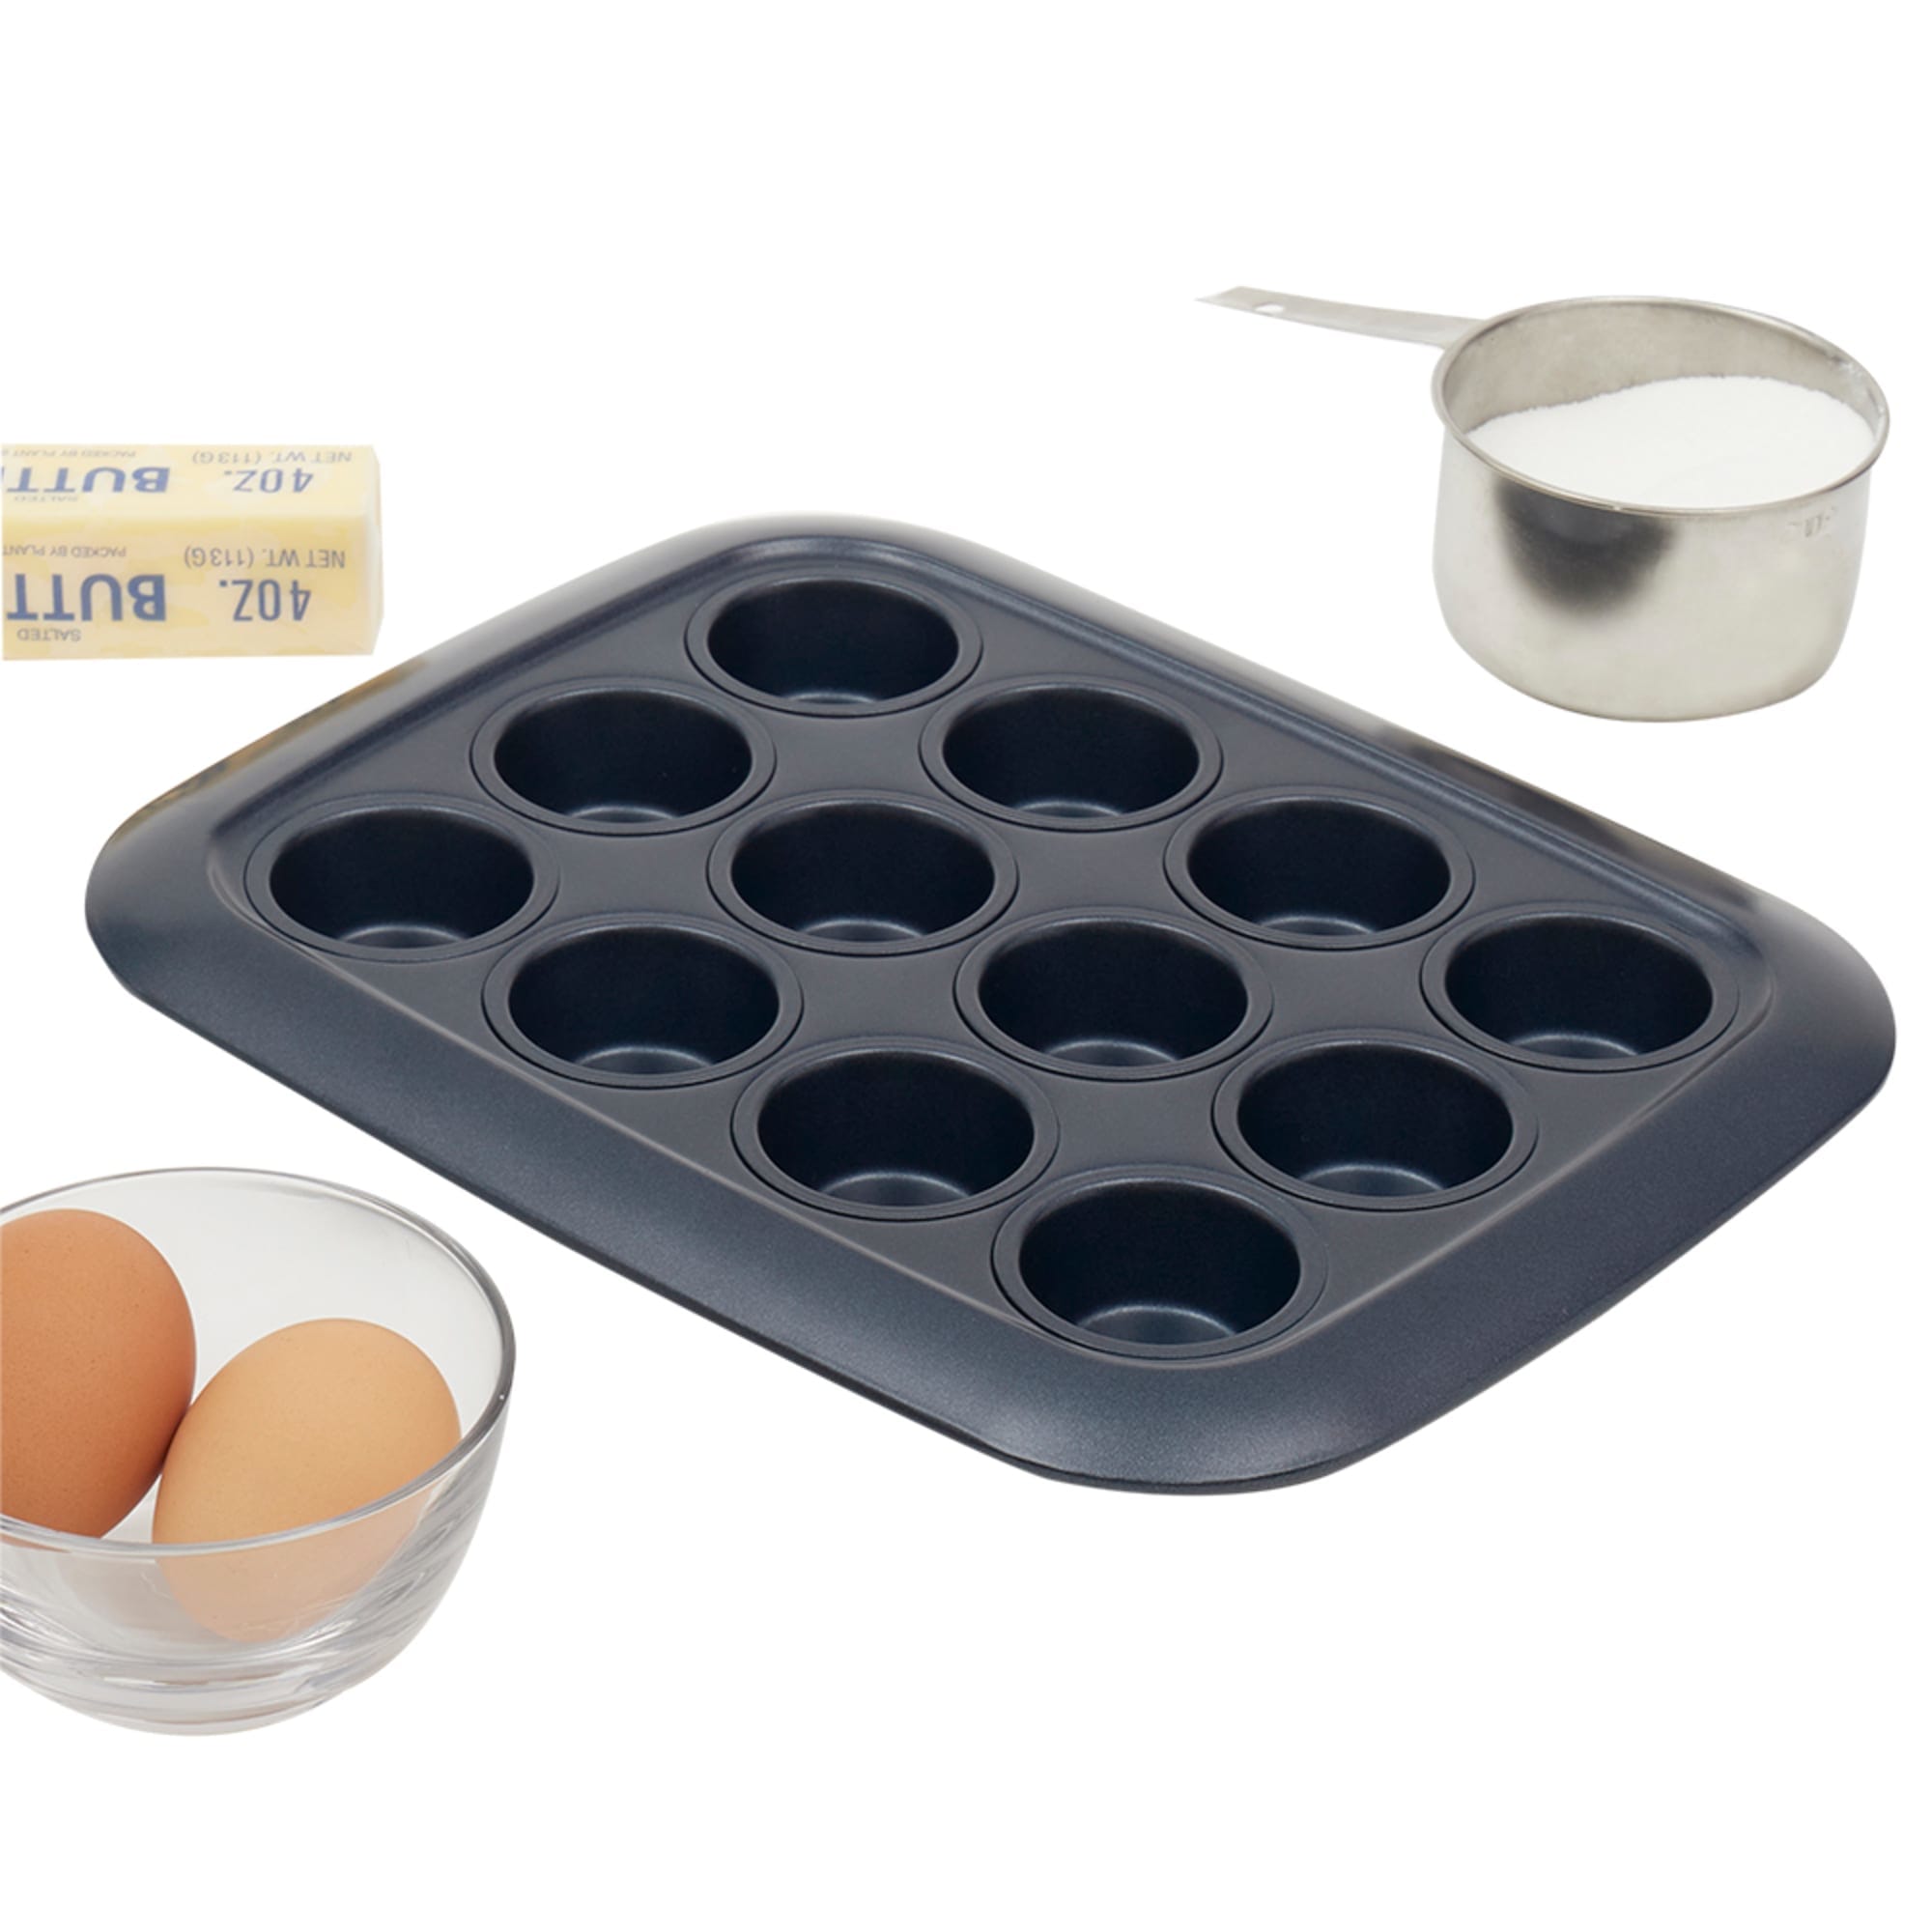 Michael Graves Design Non-Stick 12 Mini Cup Carbon Steel Muffin Pan, Indigo $7.00 EACH, CASE PACK OF 12